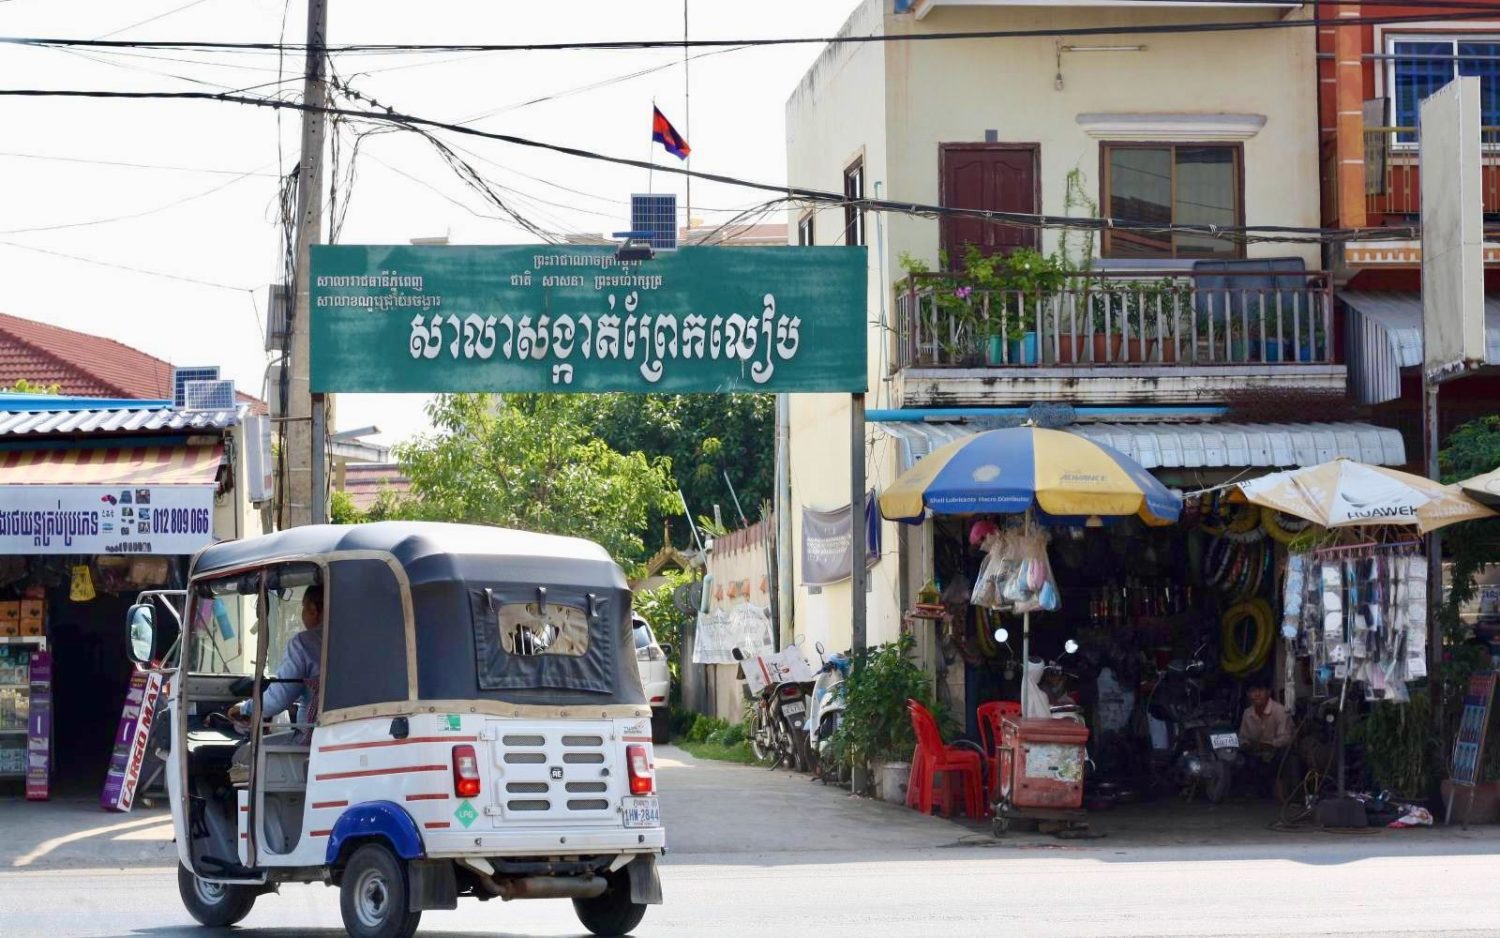 The entrance to the Prek Liep commune hall in Phnom Penh's Chroy Changva district on April 25, 2022.